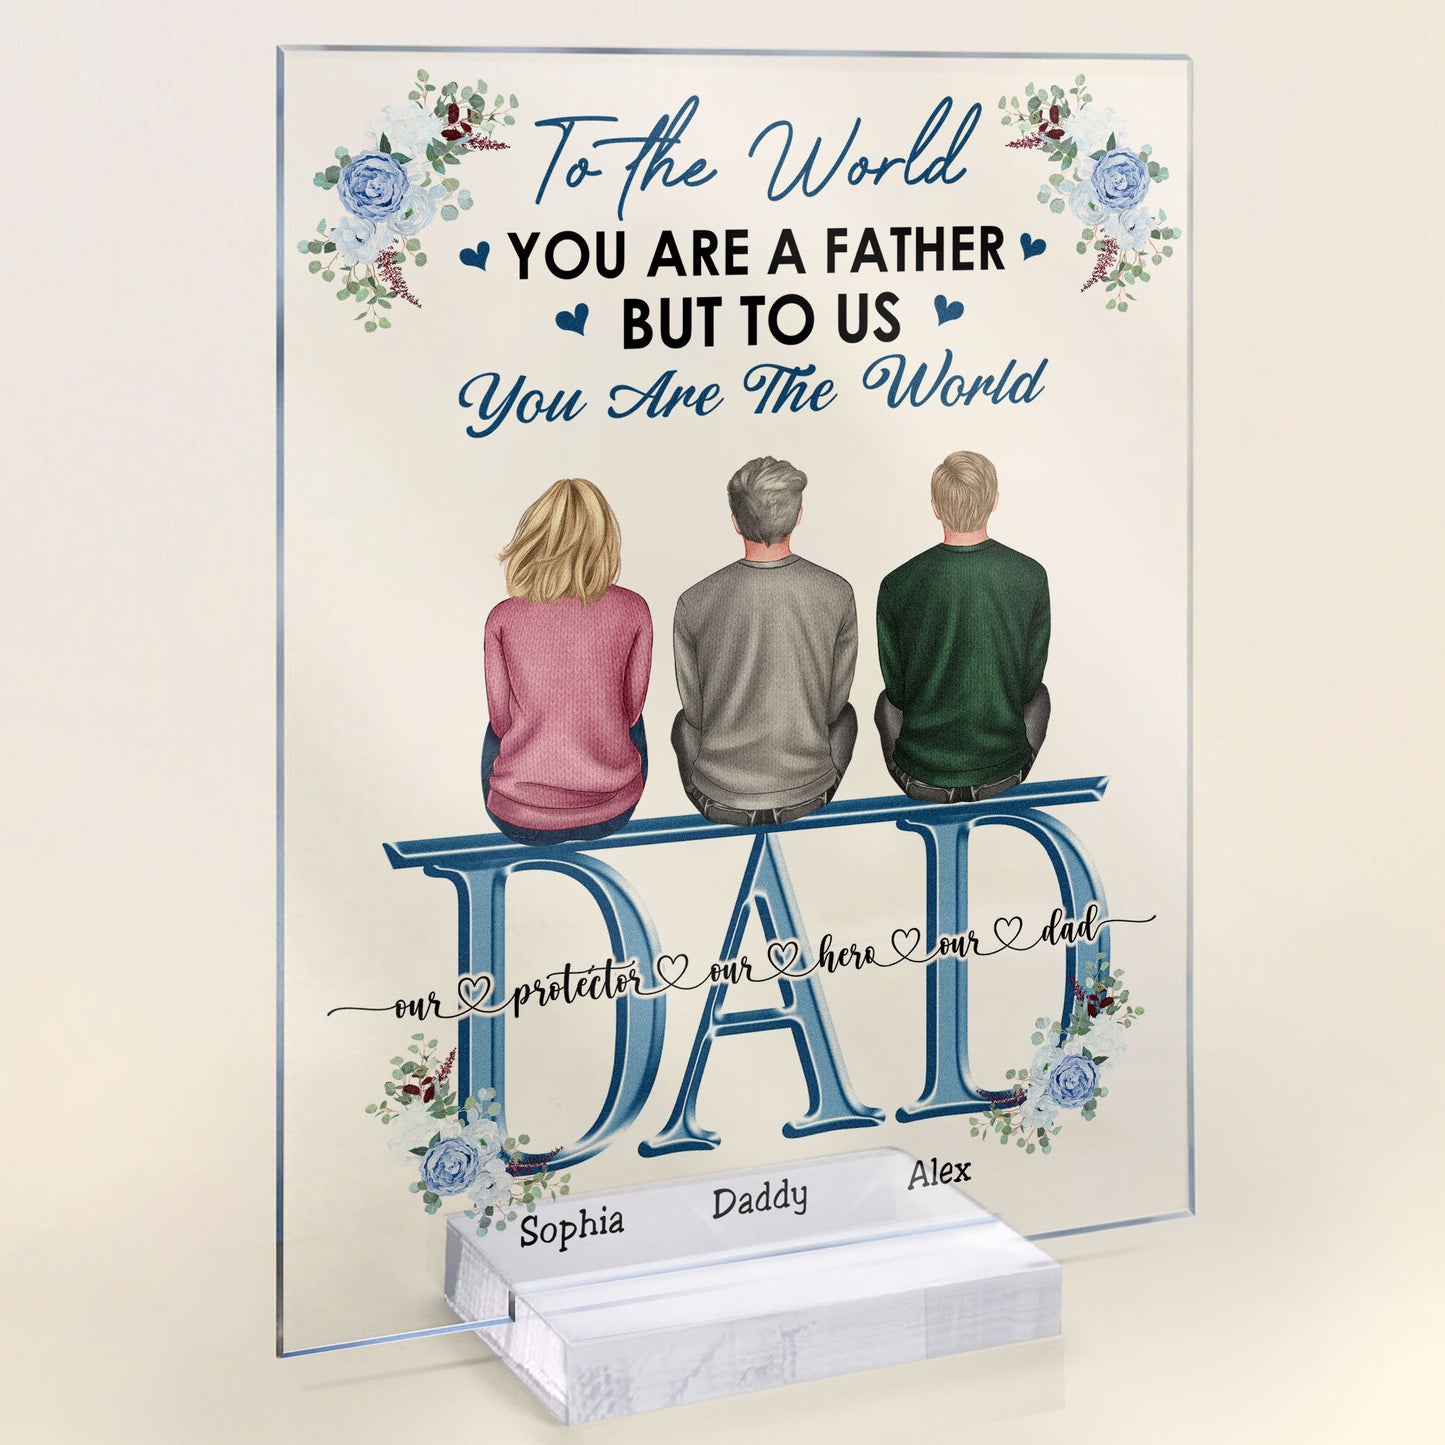 Dad We Love You - Personalized Acrylic Plaque